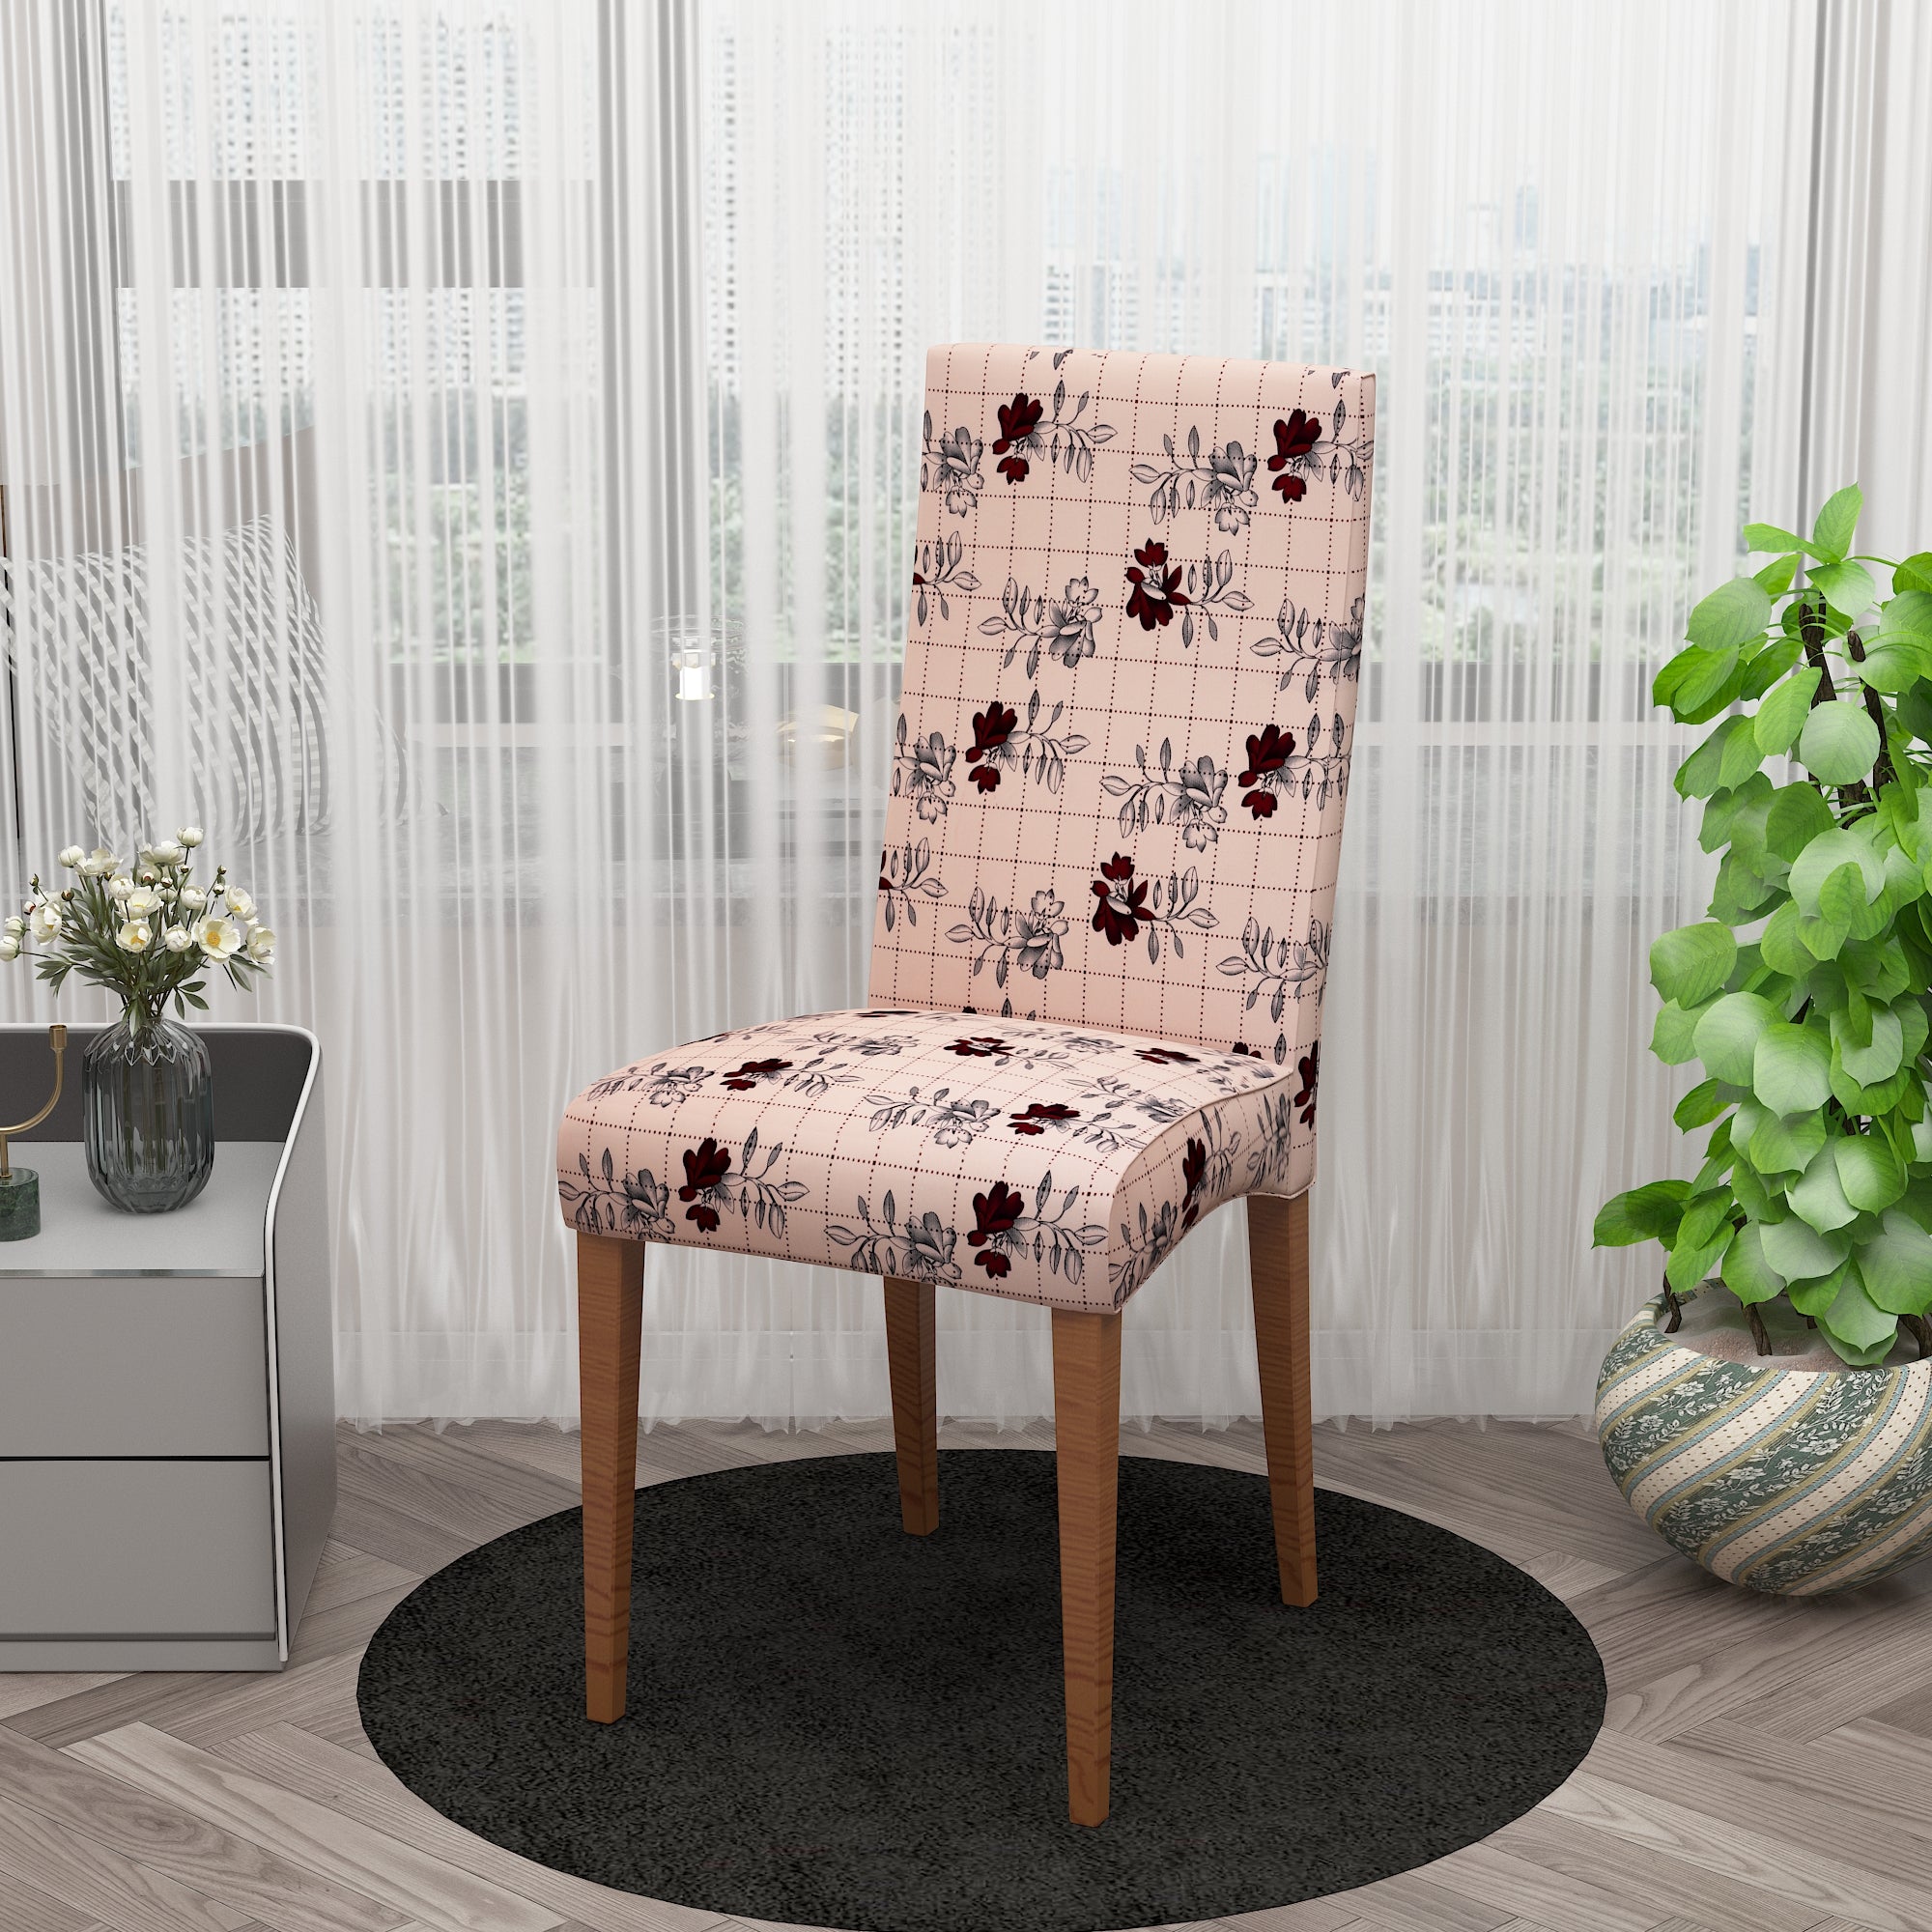 Polyester Spandex Stretchable Printed Chair Cover, MG25